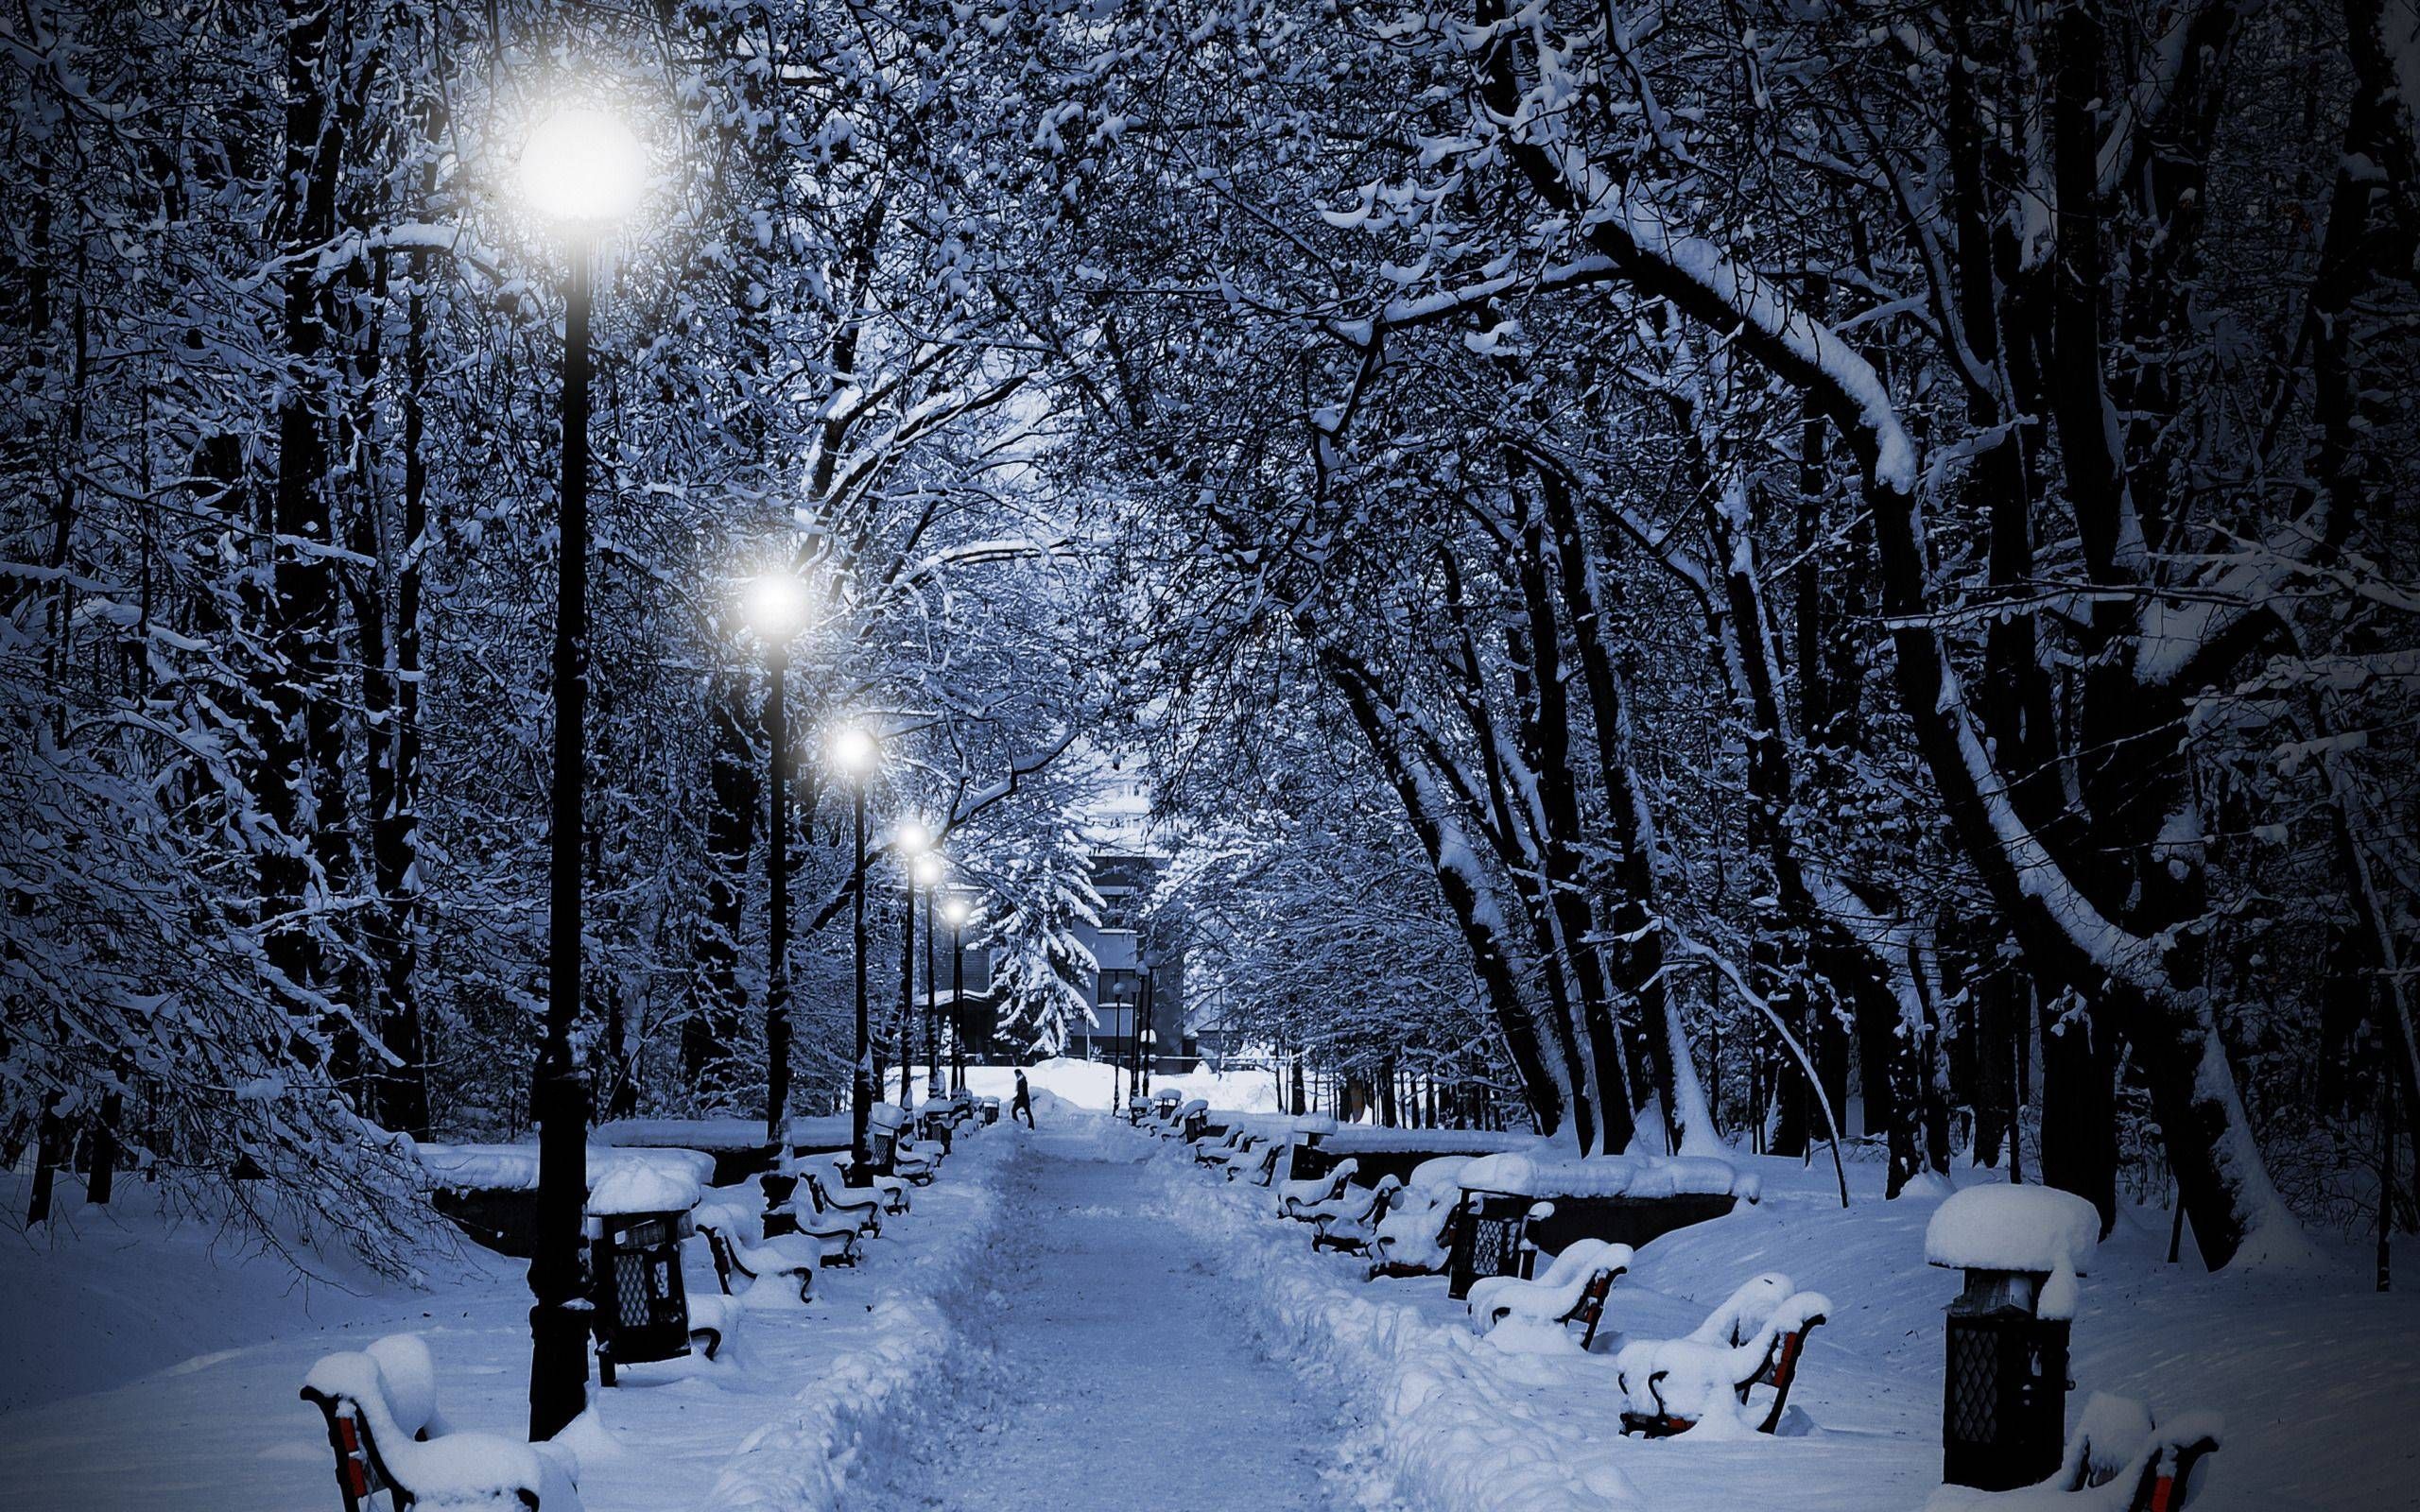 Christmas Snow Wallpaper For Android Is 4K Wallpaper. Winter scenery, Winter landscape, Winter wallpaper